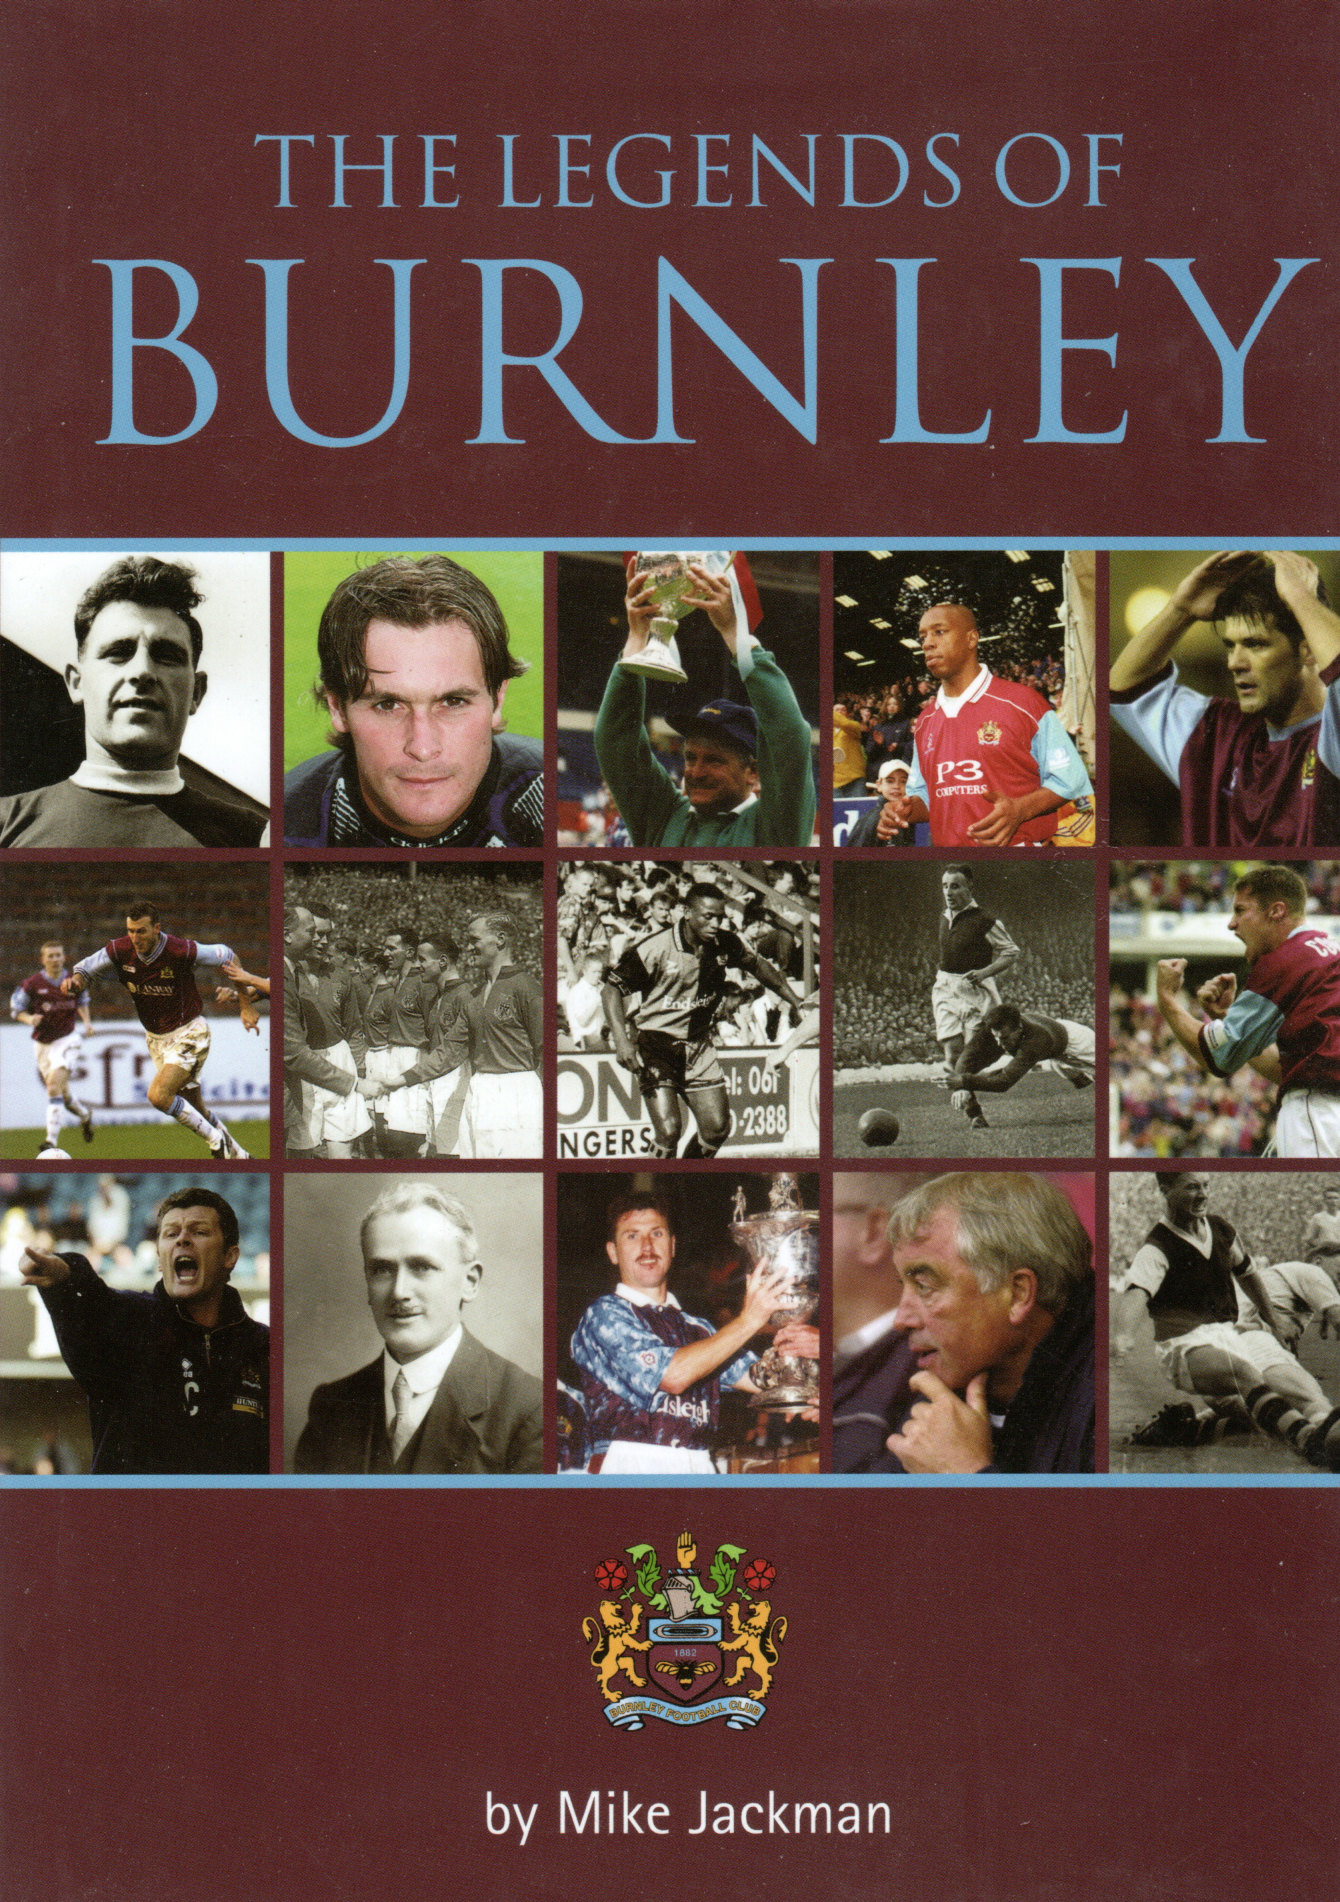 The Legends of Burnley